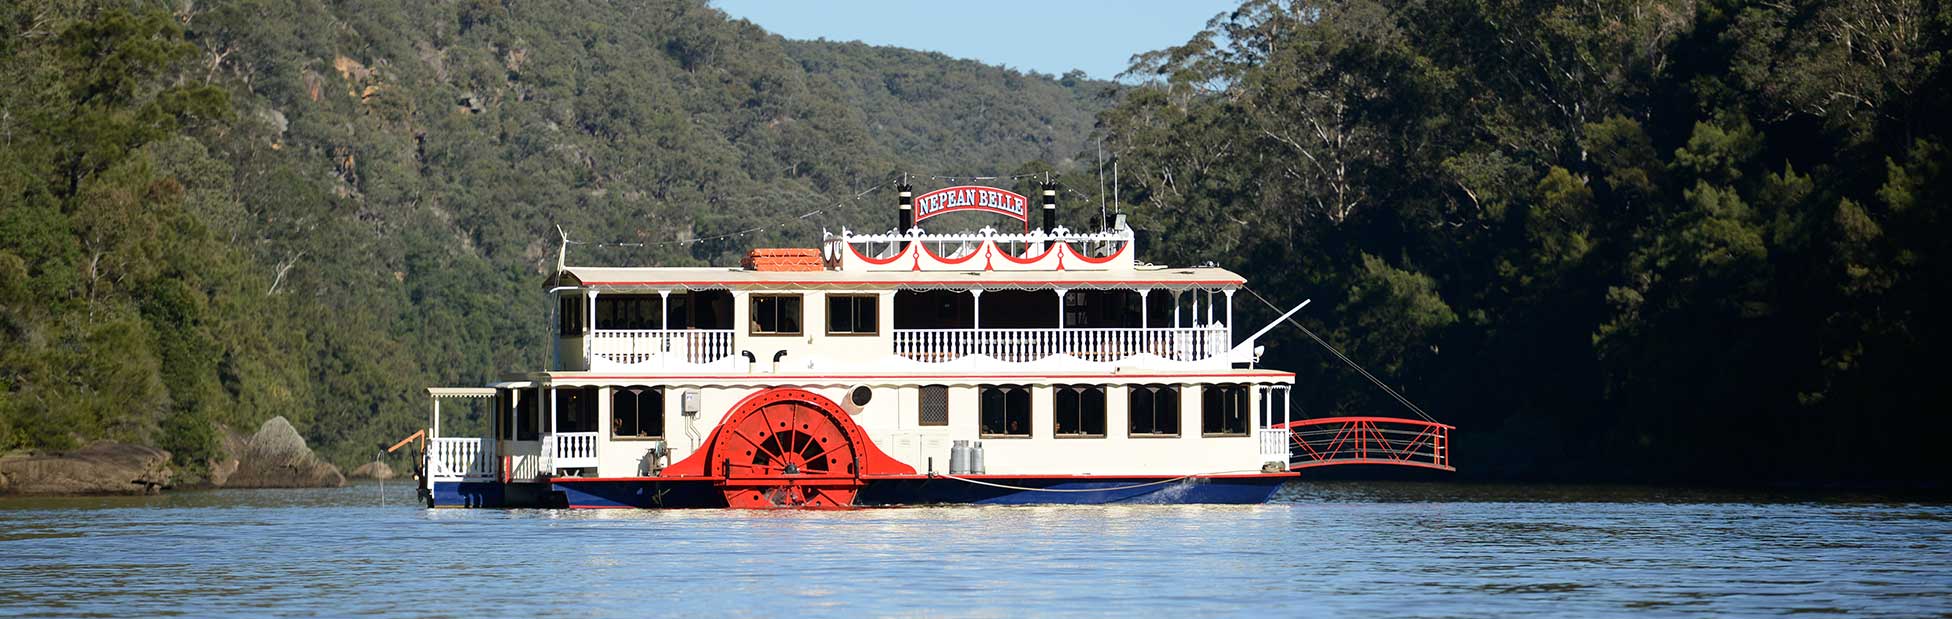 Nepean Belle paddlewheeler side on in Nepean River